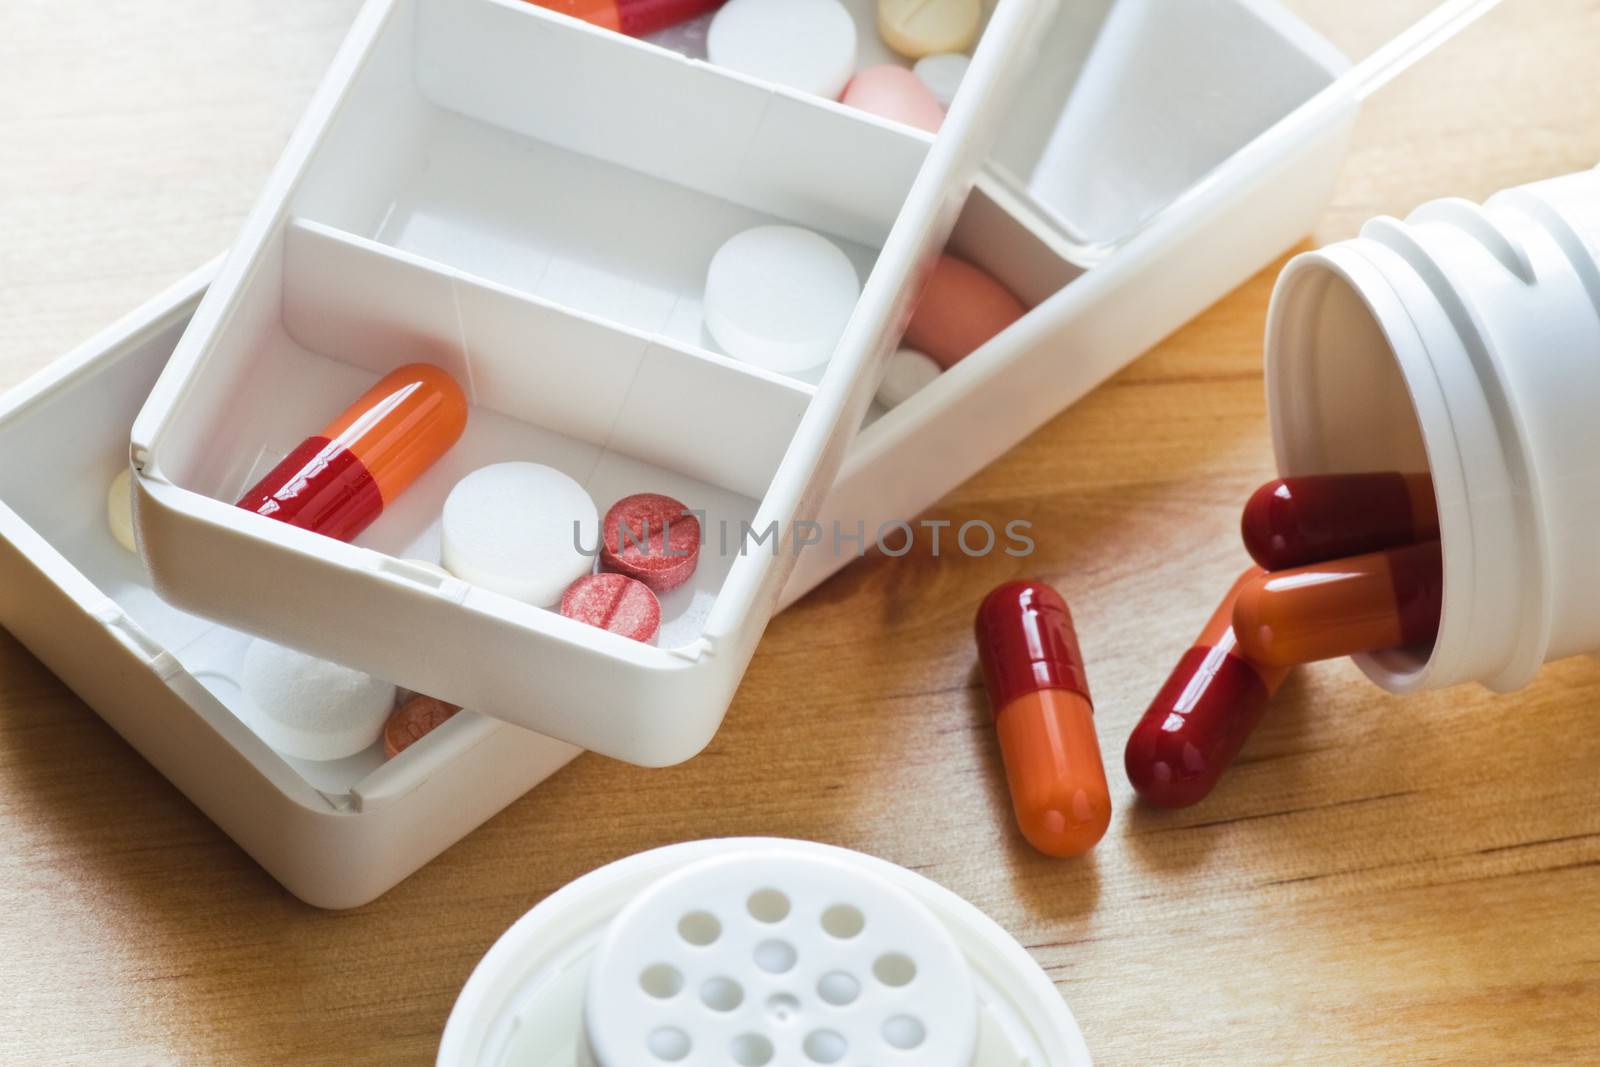 Pills and capsules sorted out in pillboxes by Colette